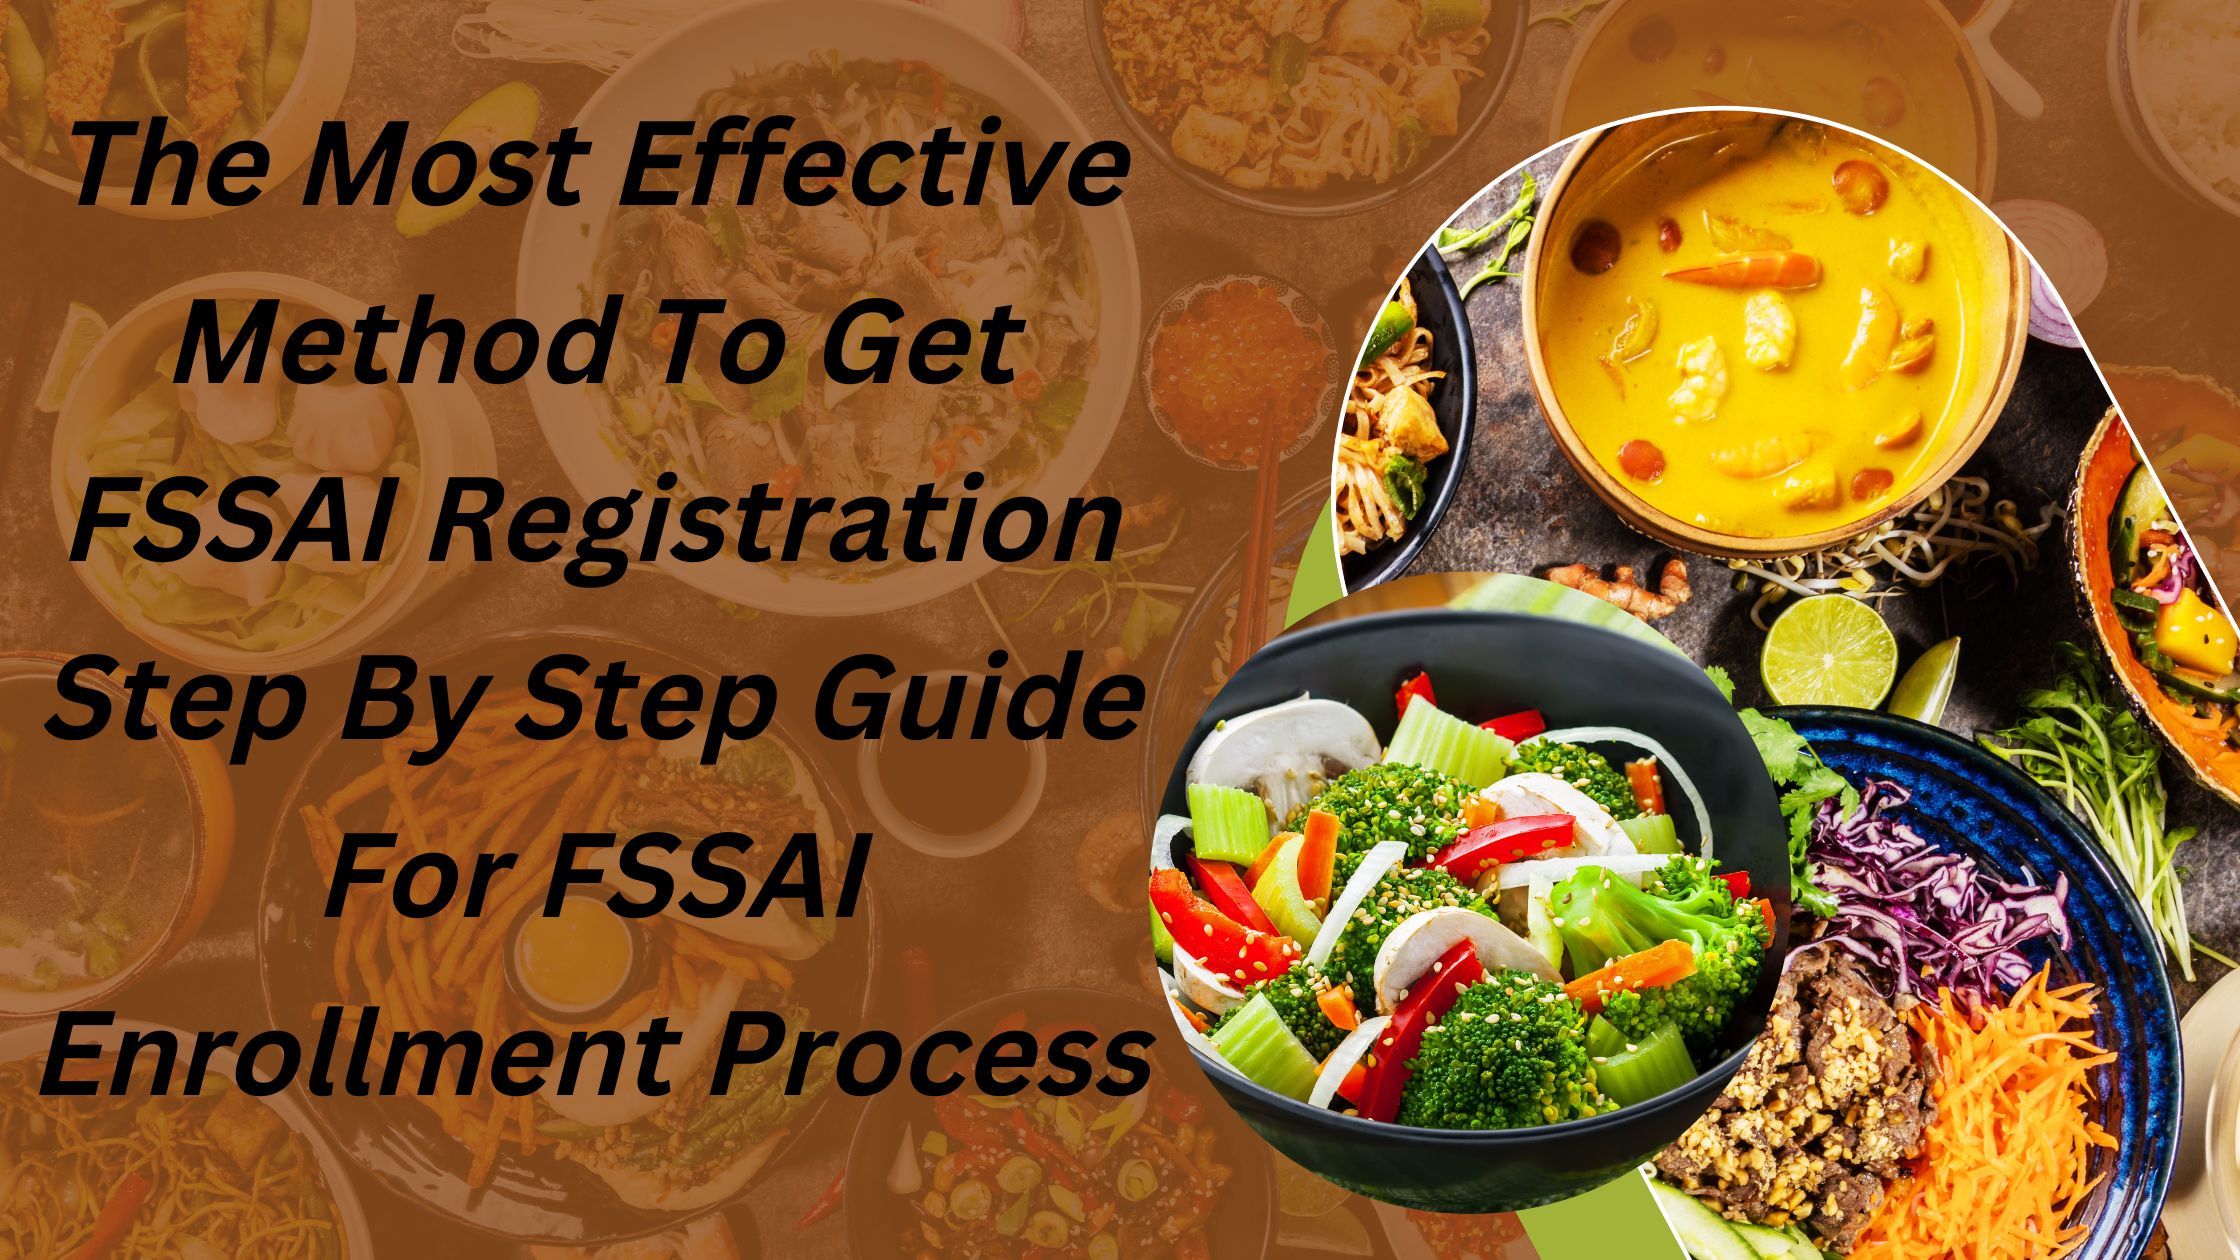 The Most Effective Method To Get FSSAI Registration Step By Step Guide For FSSAI Enrollment Process